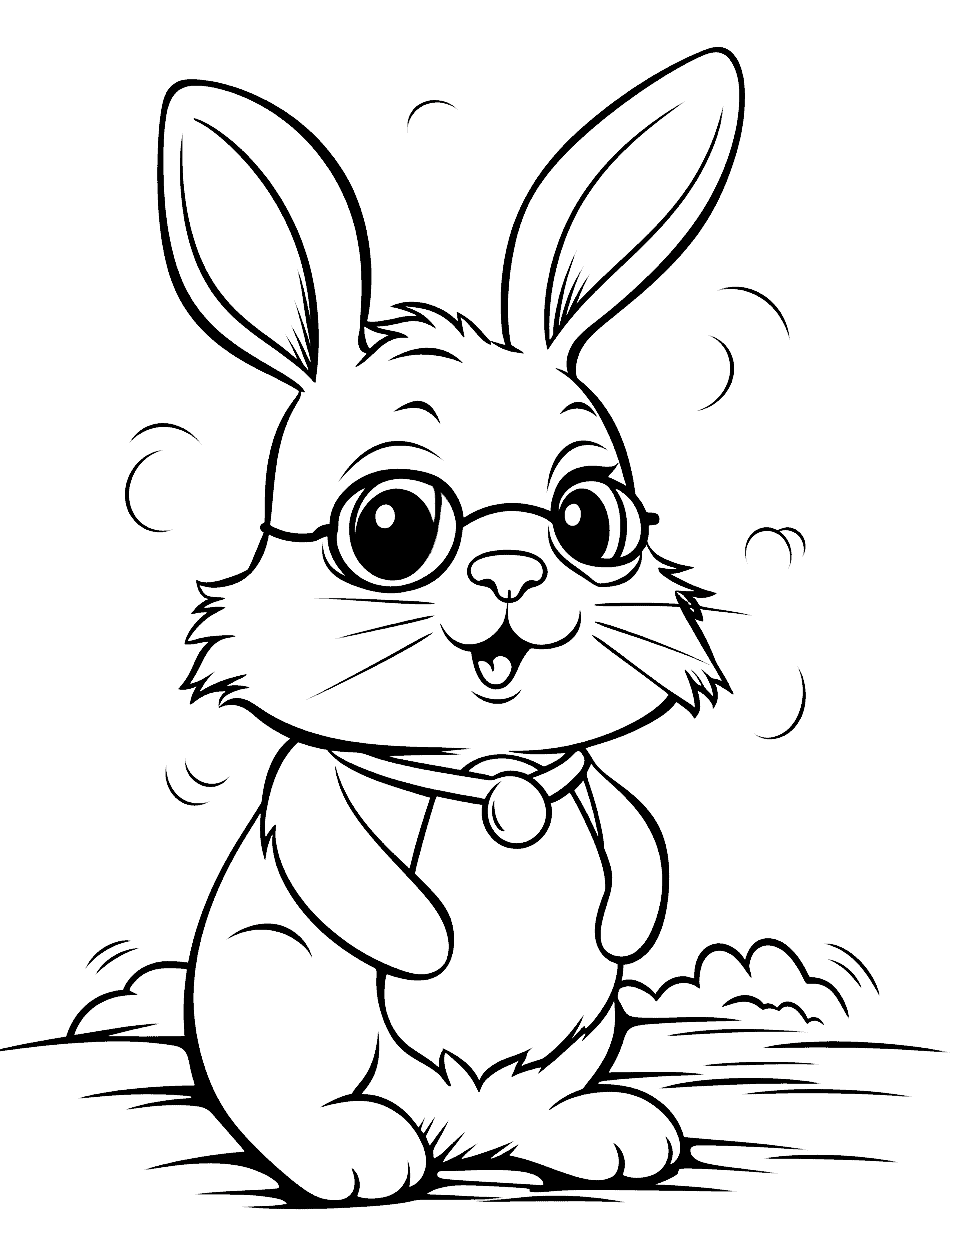 Adorable Bunny with Oversized Glasses Coloring Page - Our bunny tries on a pair of oversized spectacles, looking cuter than ever.